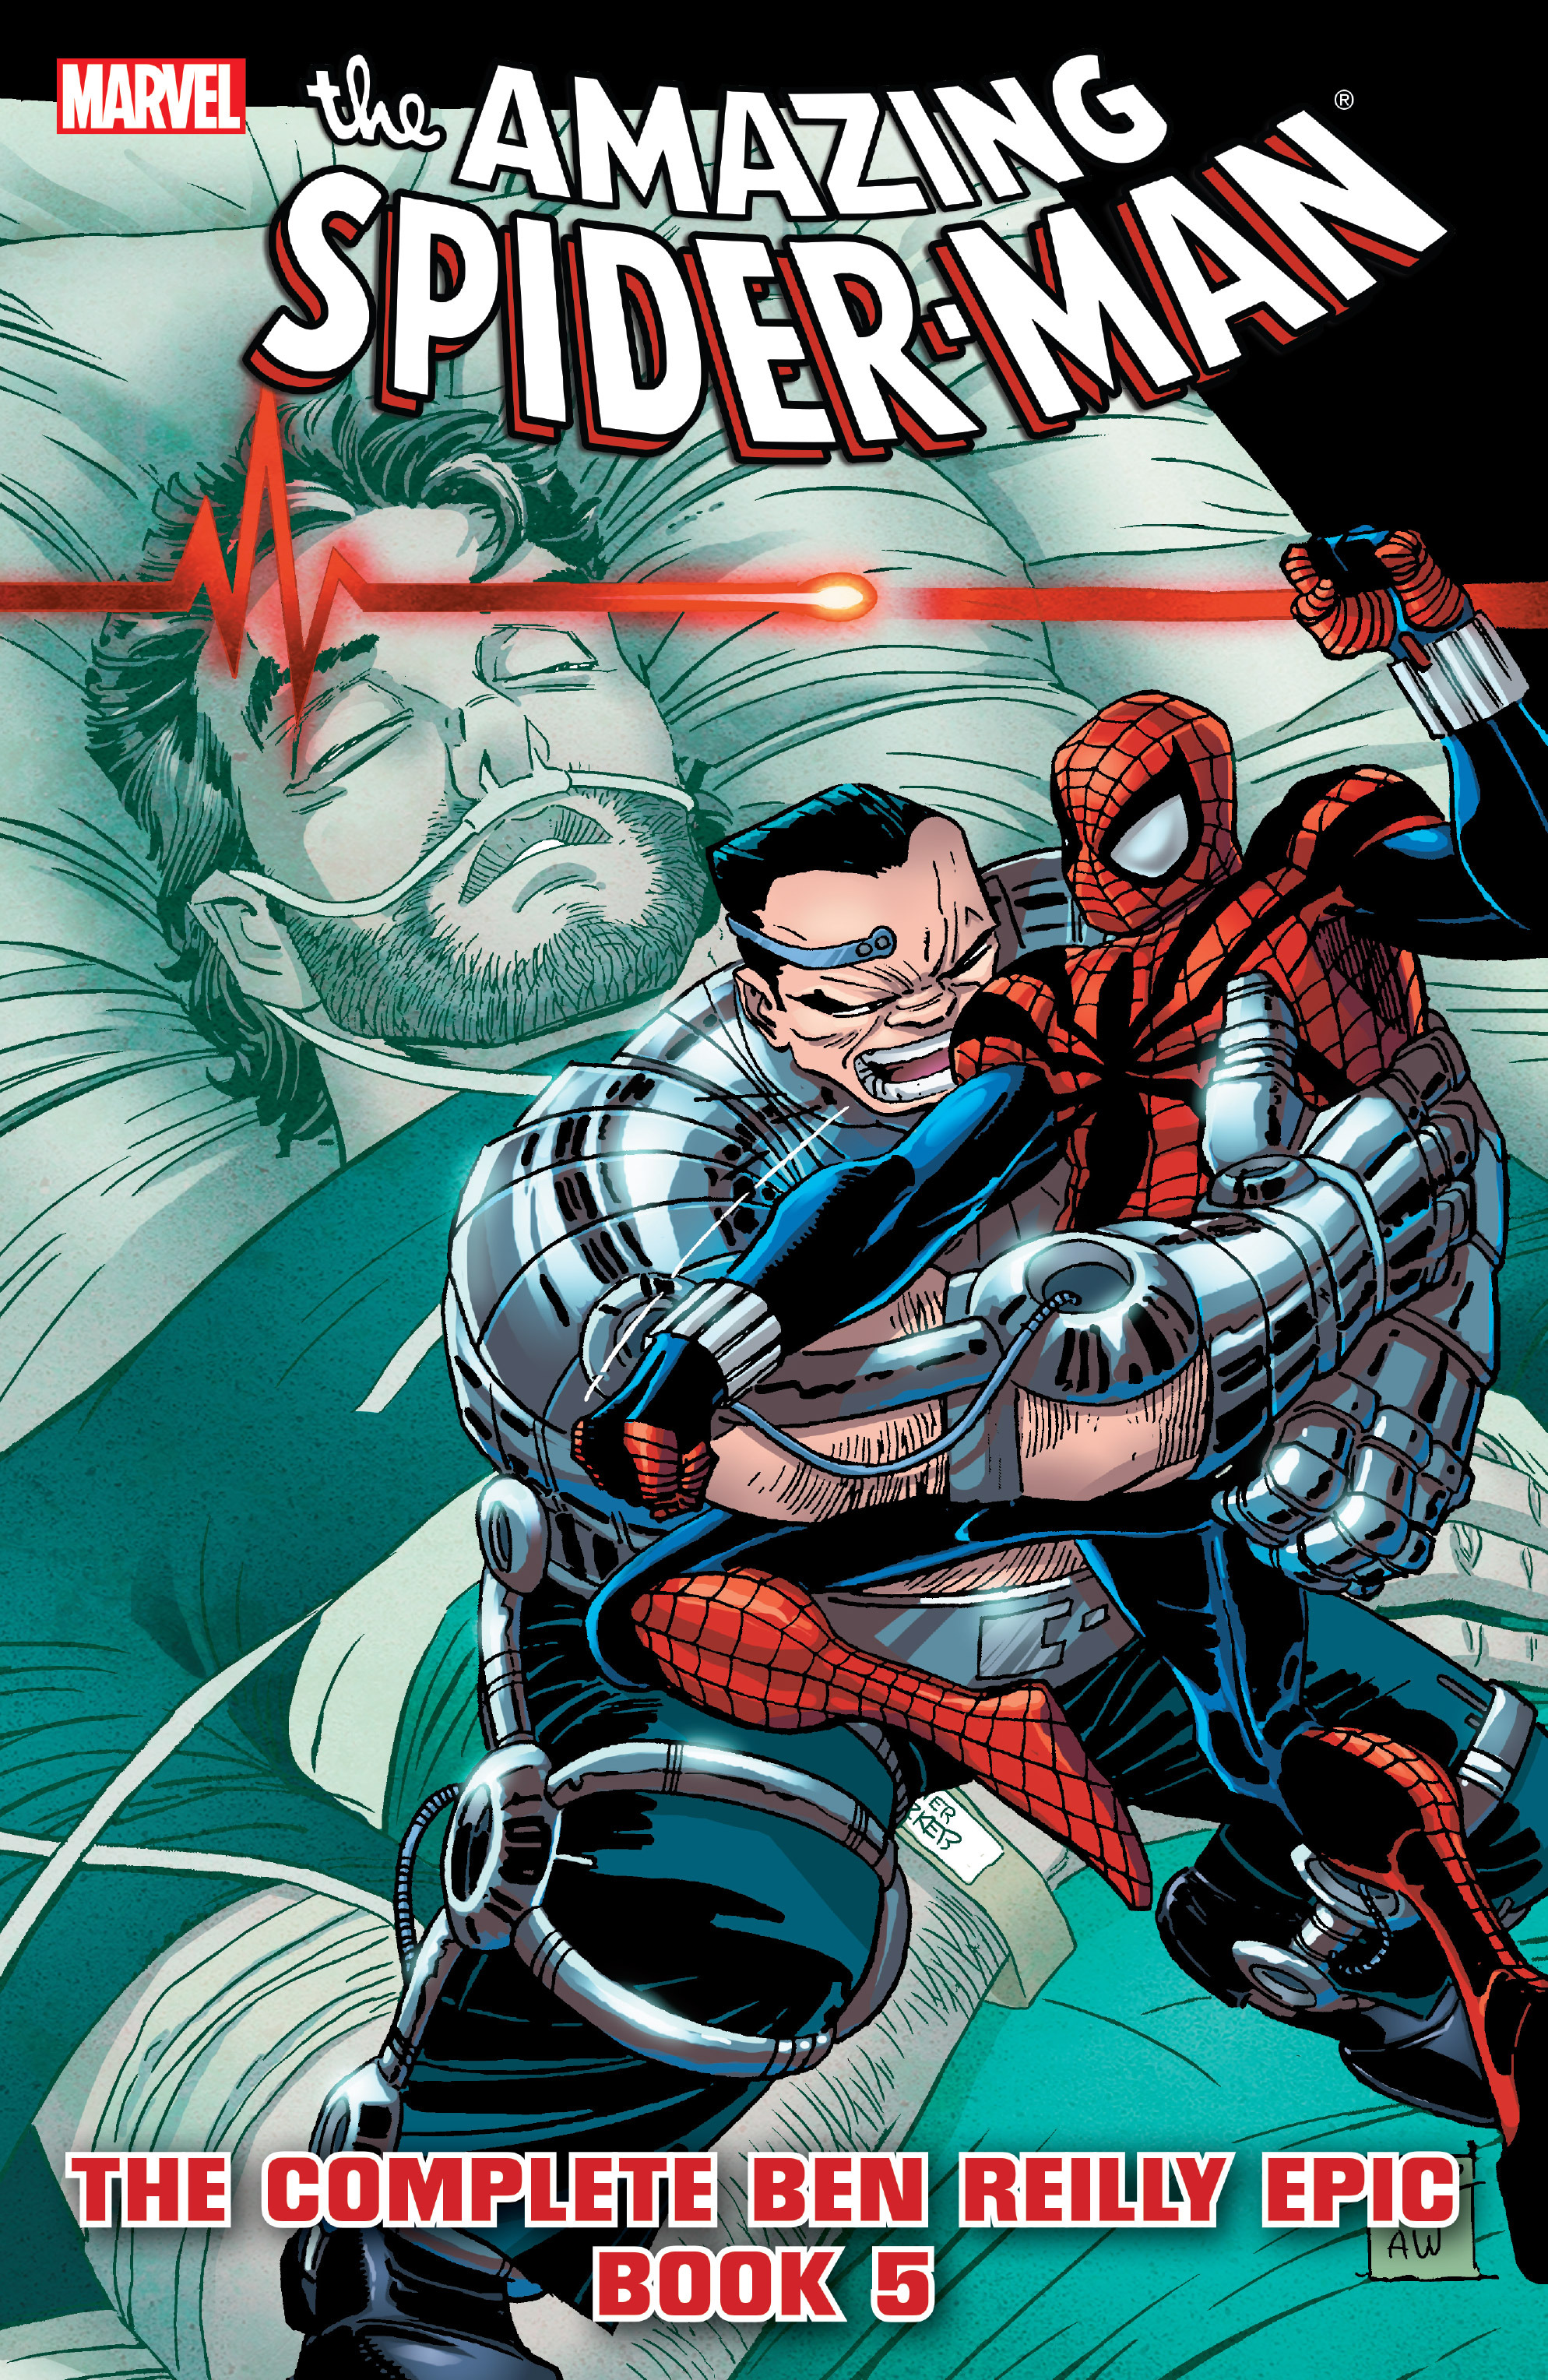 Read online The Amazing Spider-Man: The Complete Ben Reilly Epic comic -  Issue # TPB 5 - 1